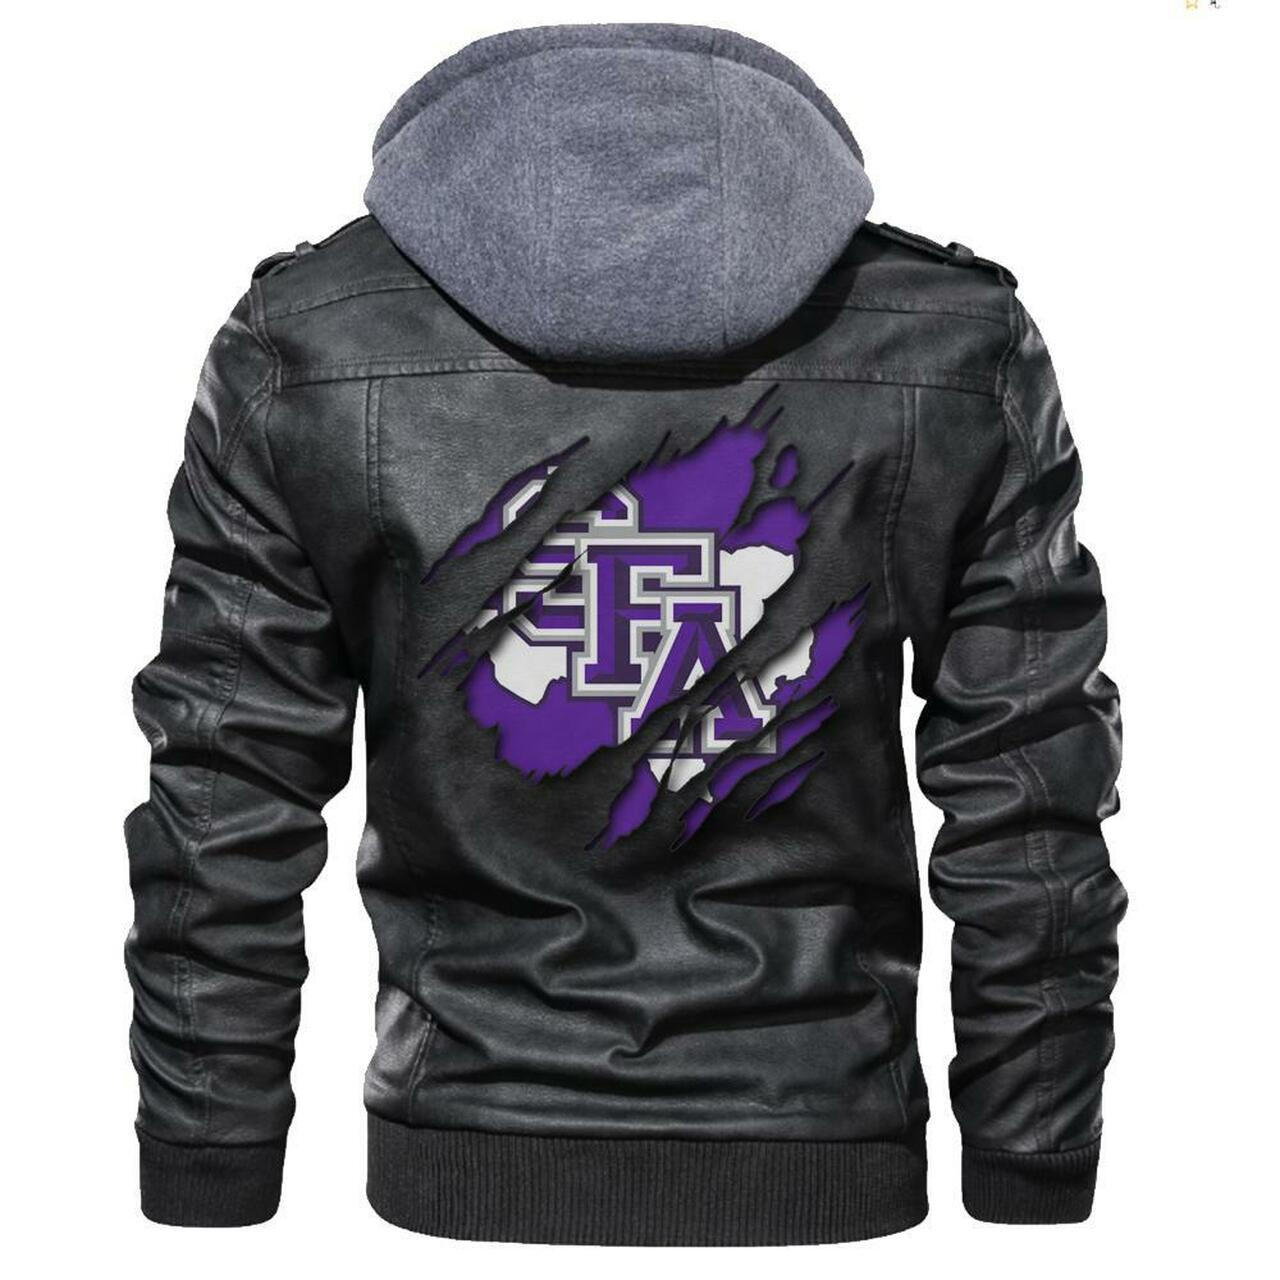 Our store has all of the latest leather jacket 97